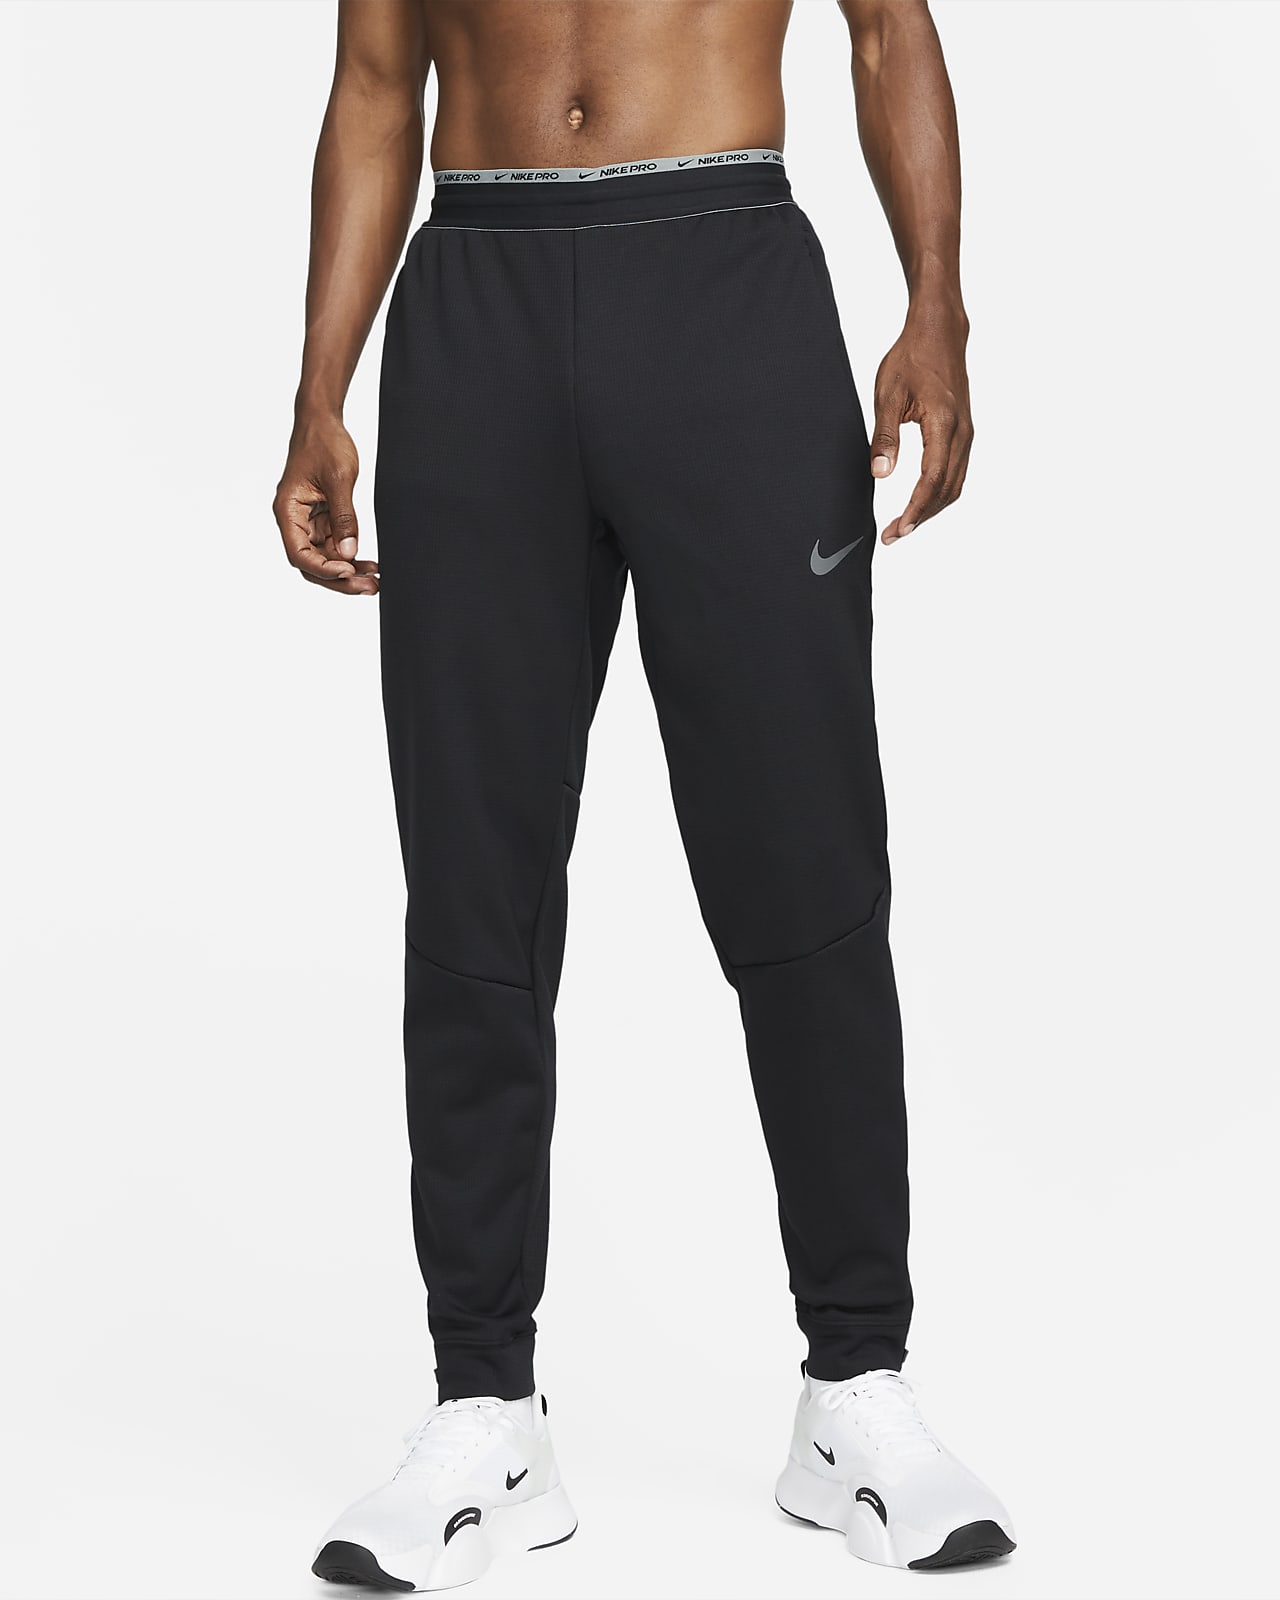 Nike Therma Sphere Men's Therma-FIT Fitness Pants.